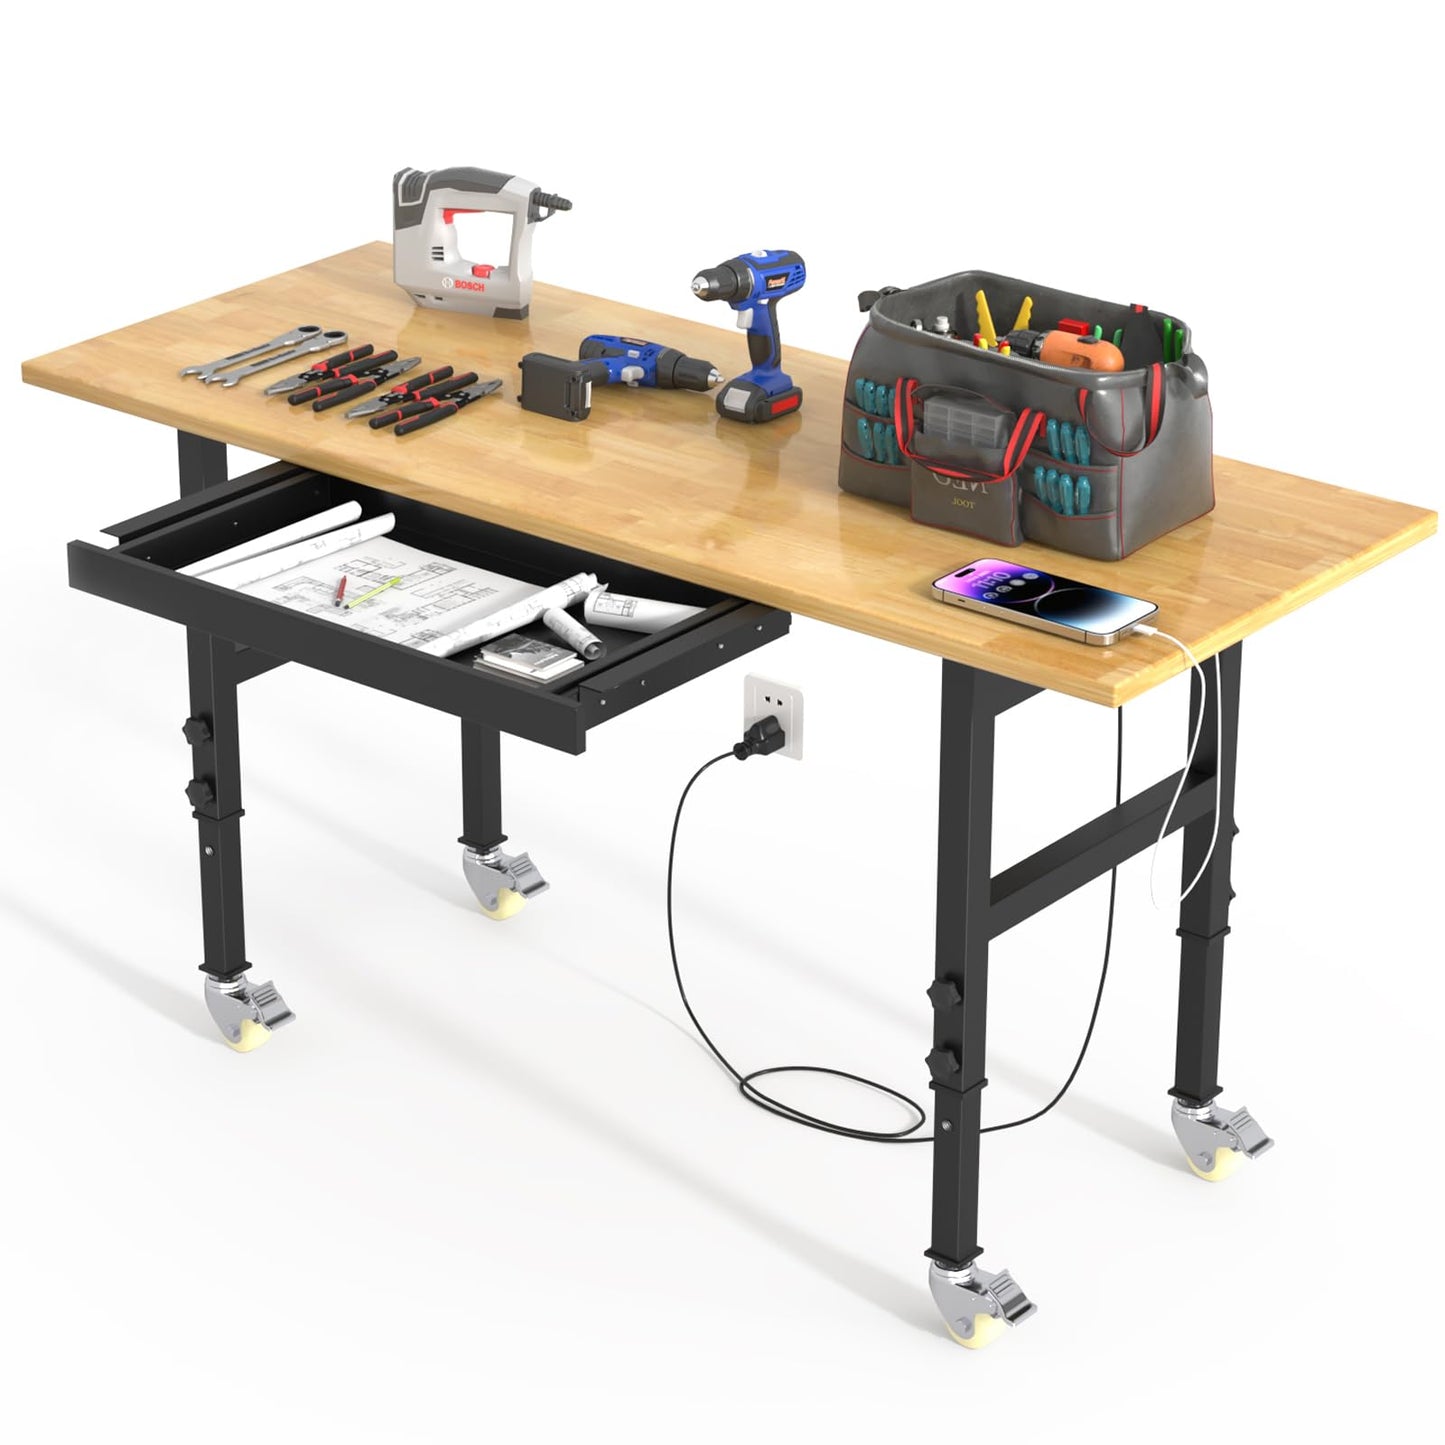 DUSACOM 60" Adjustable Height Heavy Duty Workbench for Garage,Rubber Wood Top Working Table, 2000 LBS Load Capacity with Power Outlets&Drawer for